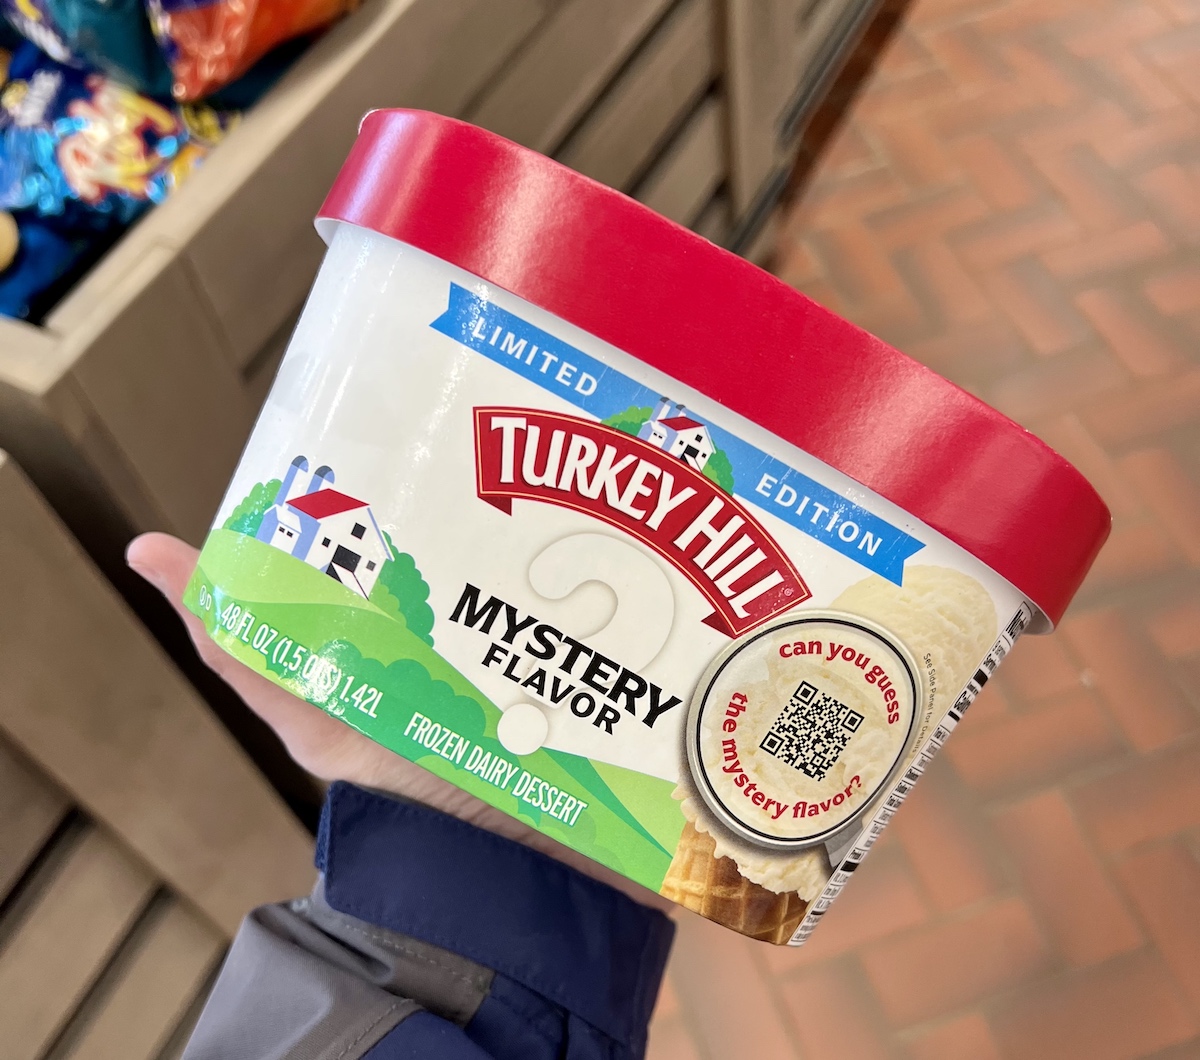 Turkey Hill – Mystery Flavor Ice Cream [Review]